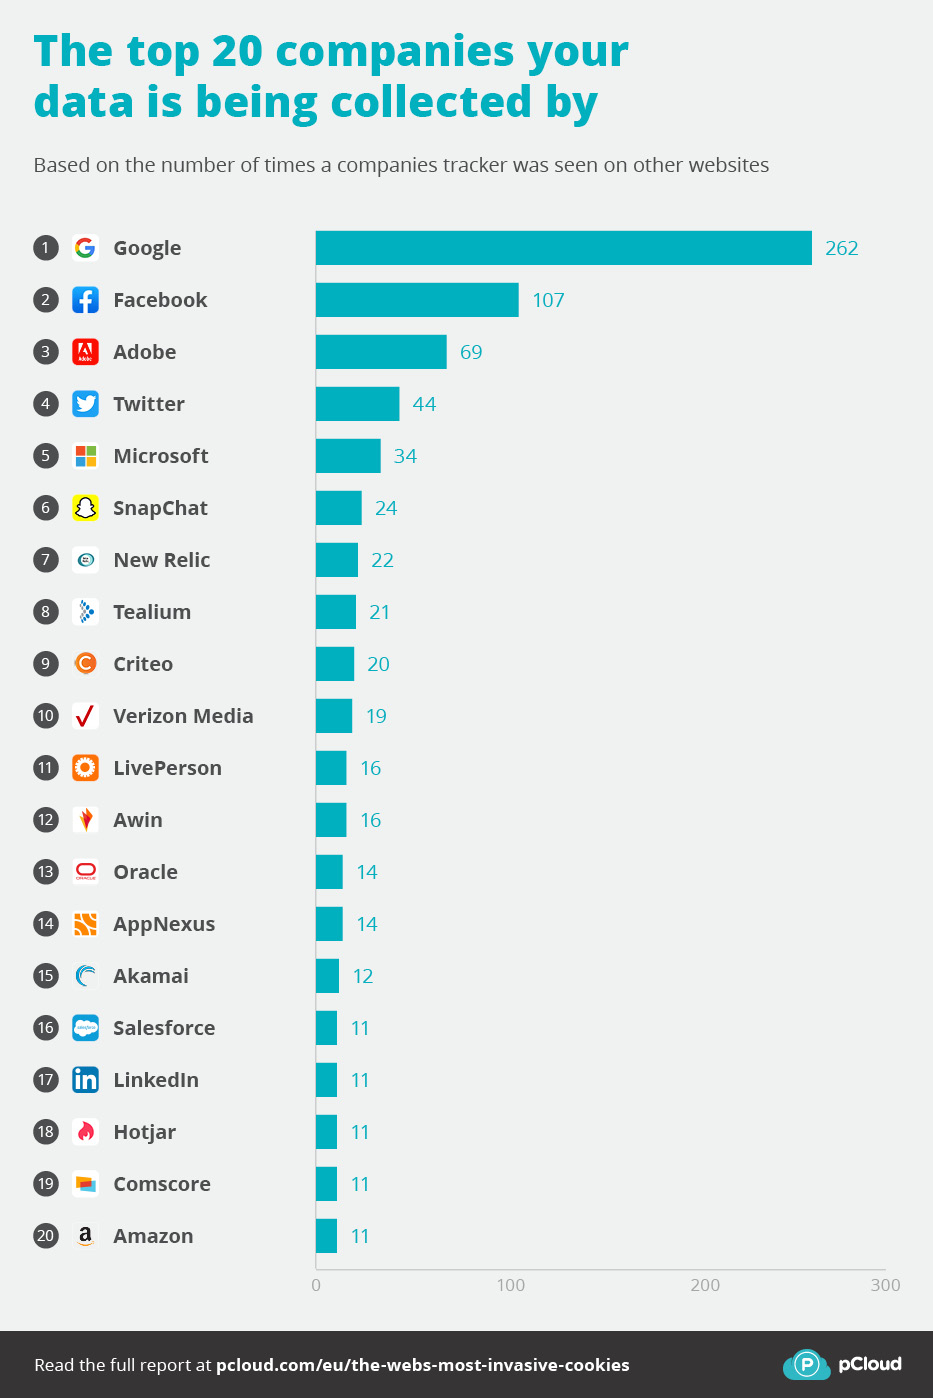 The top 20 companies your data is being collected by